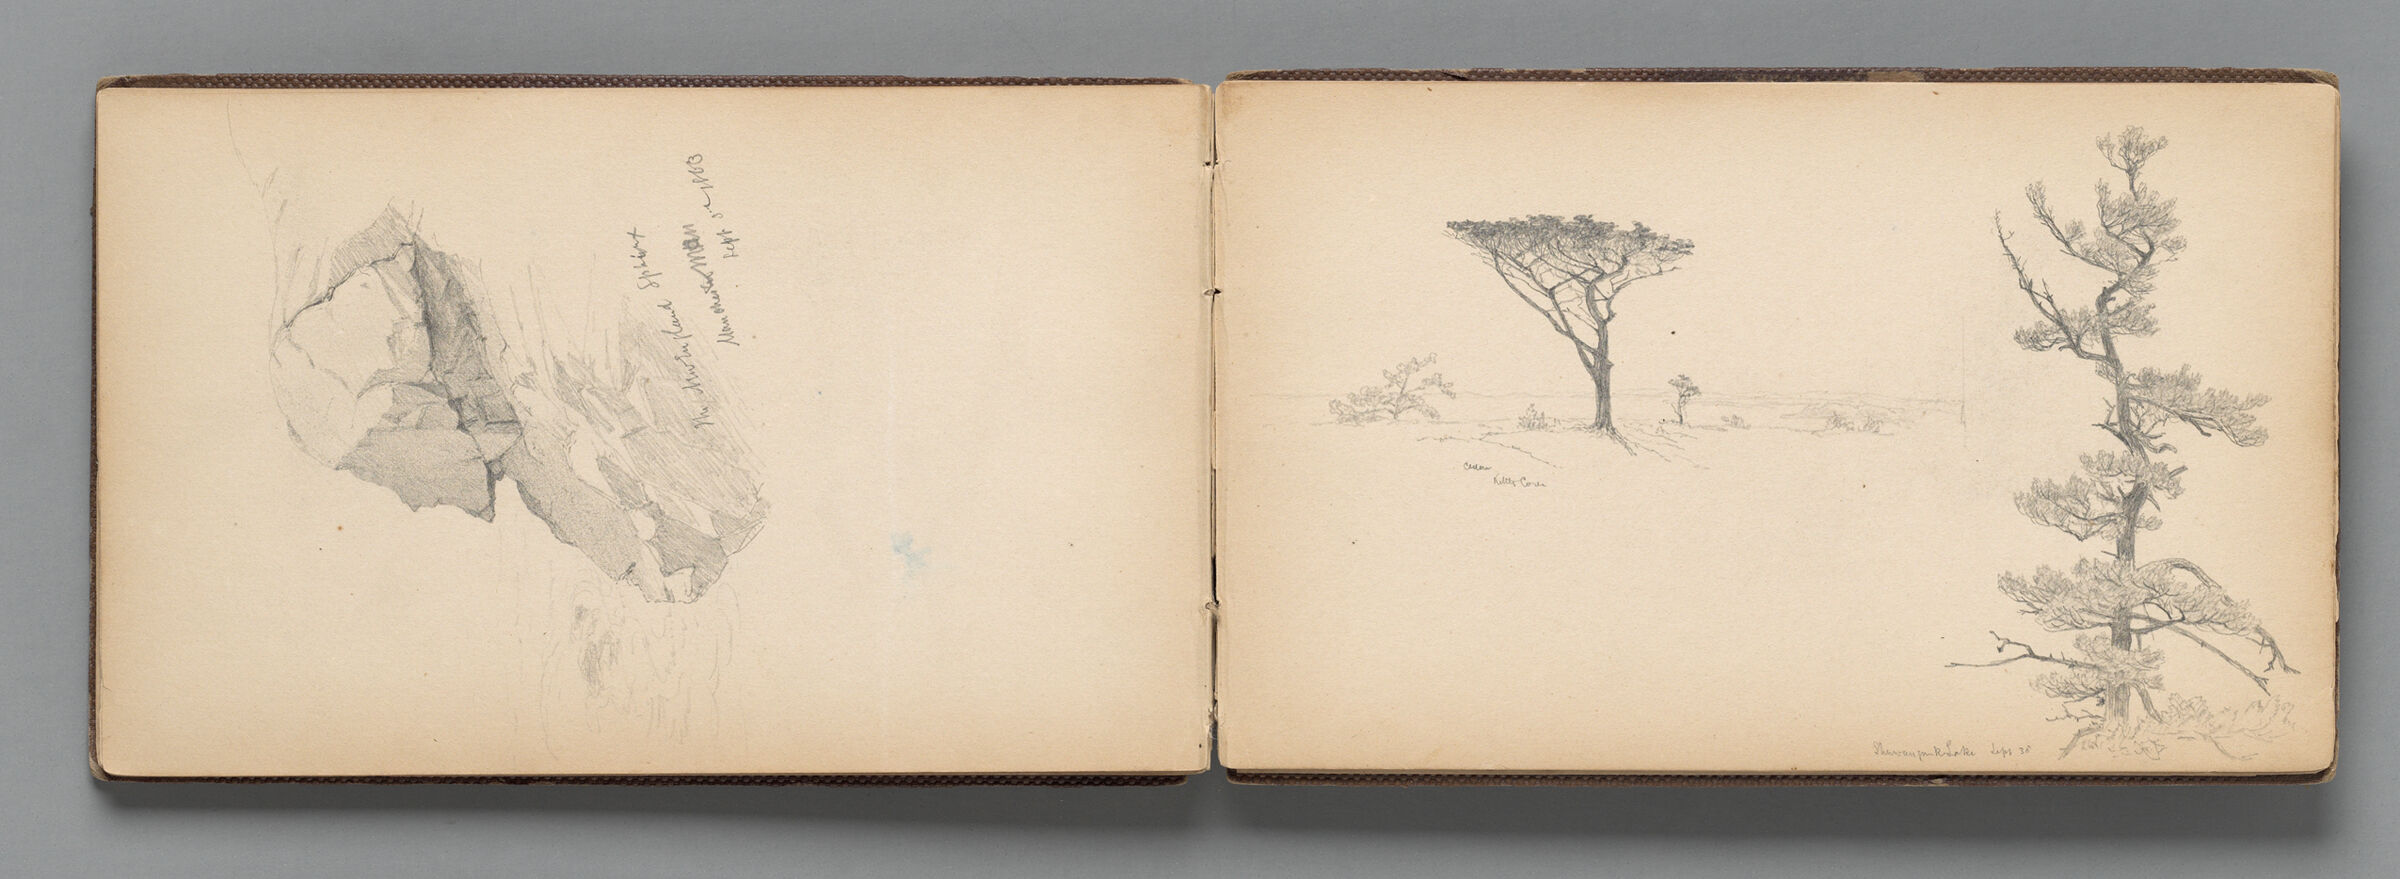 Two Studies Of Trees; Verso: Partial Manchester Beach Seascape